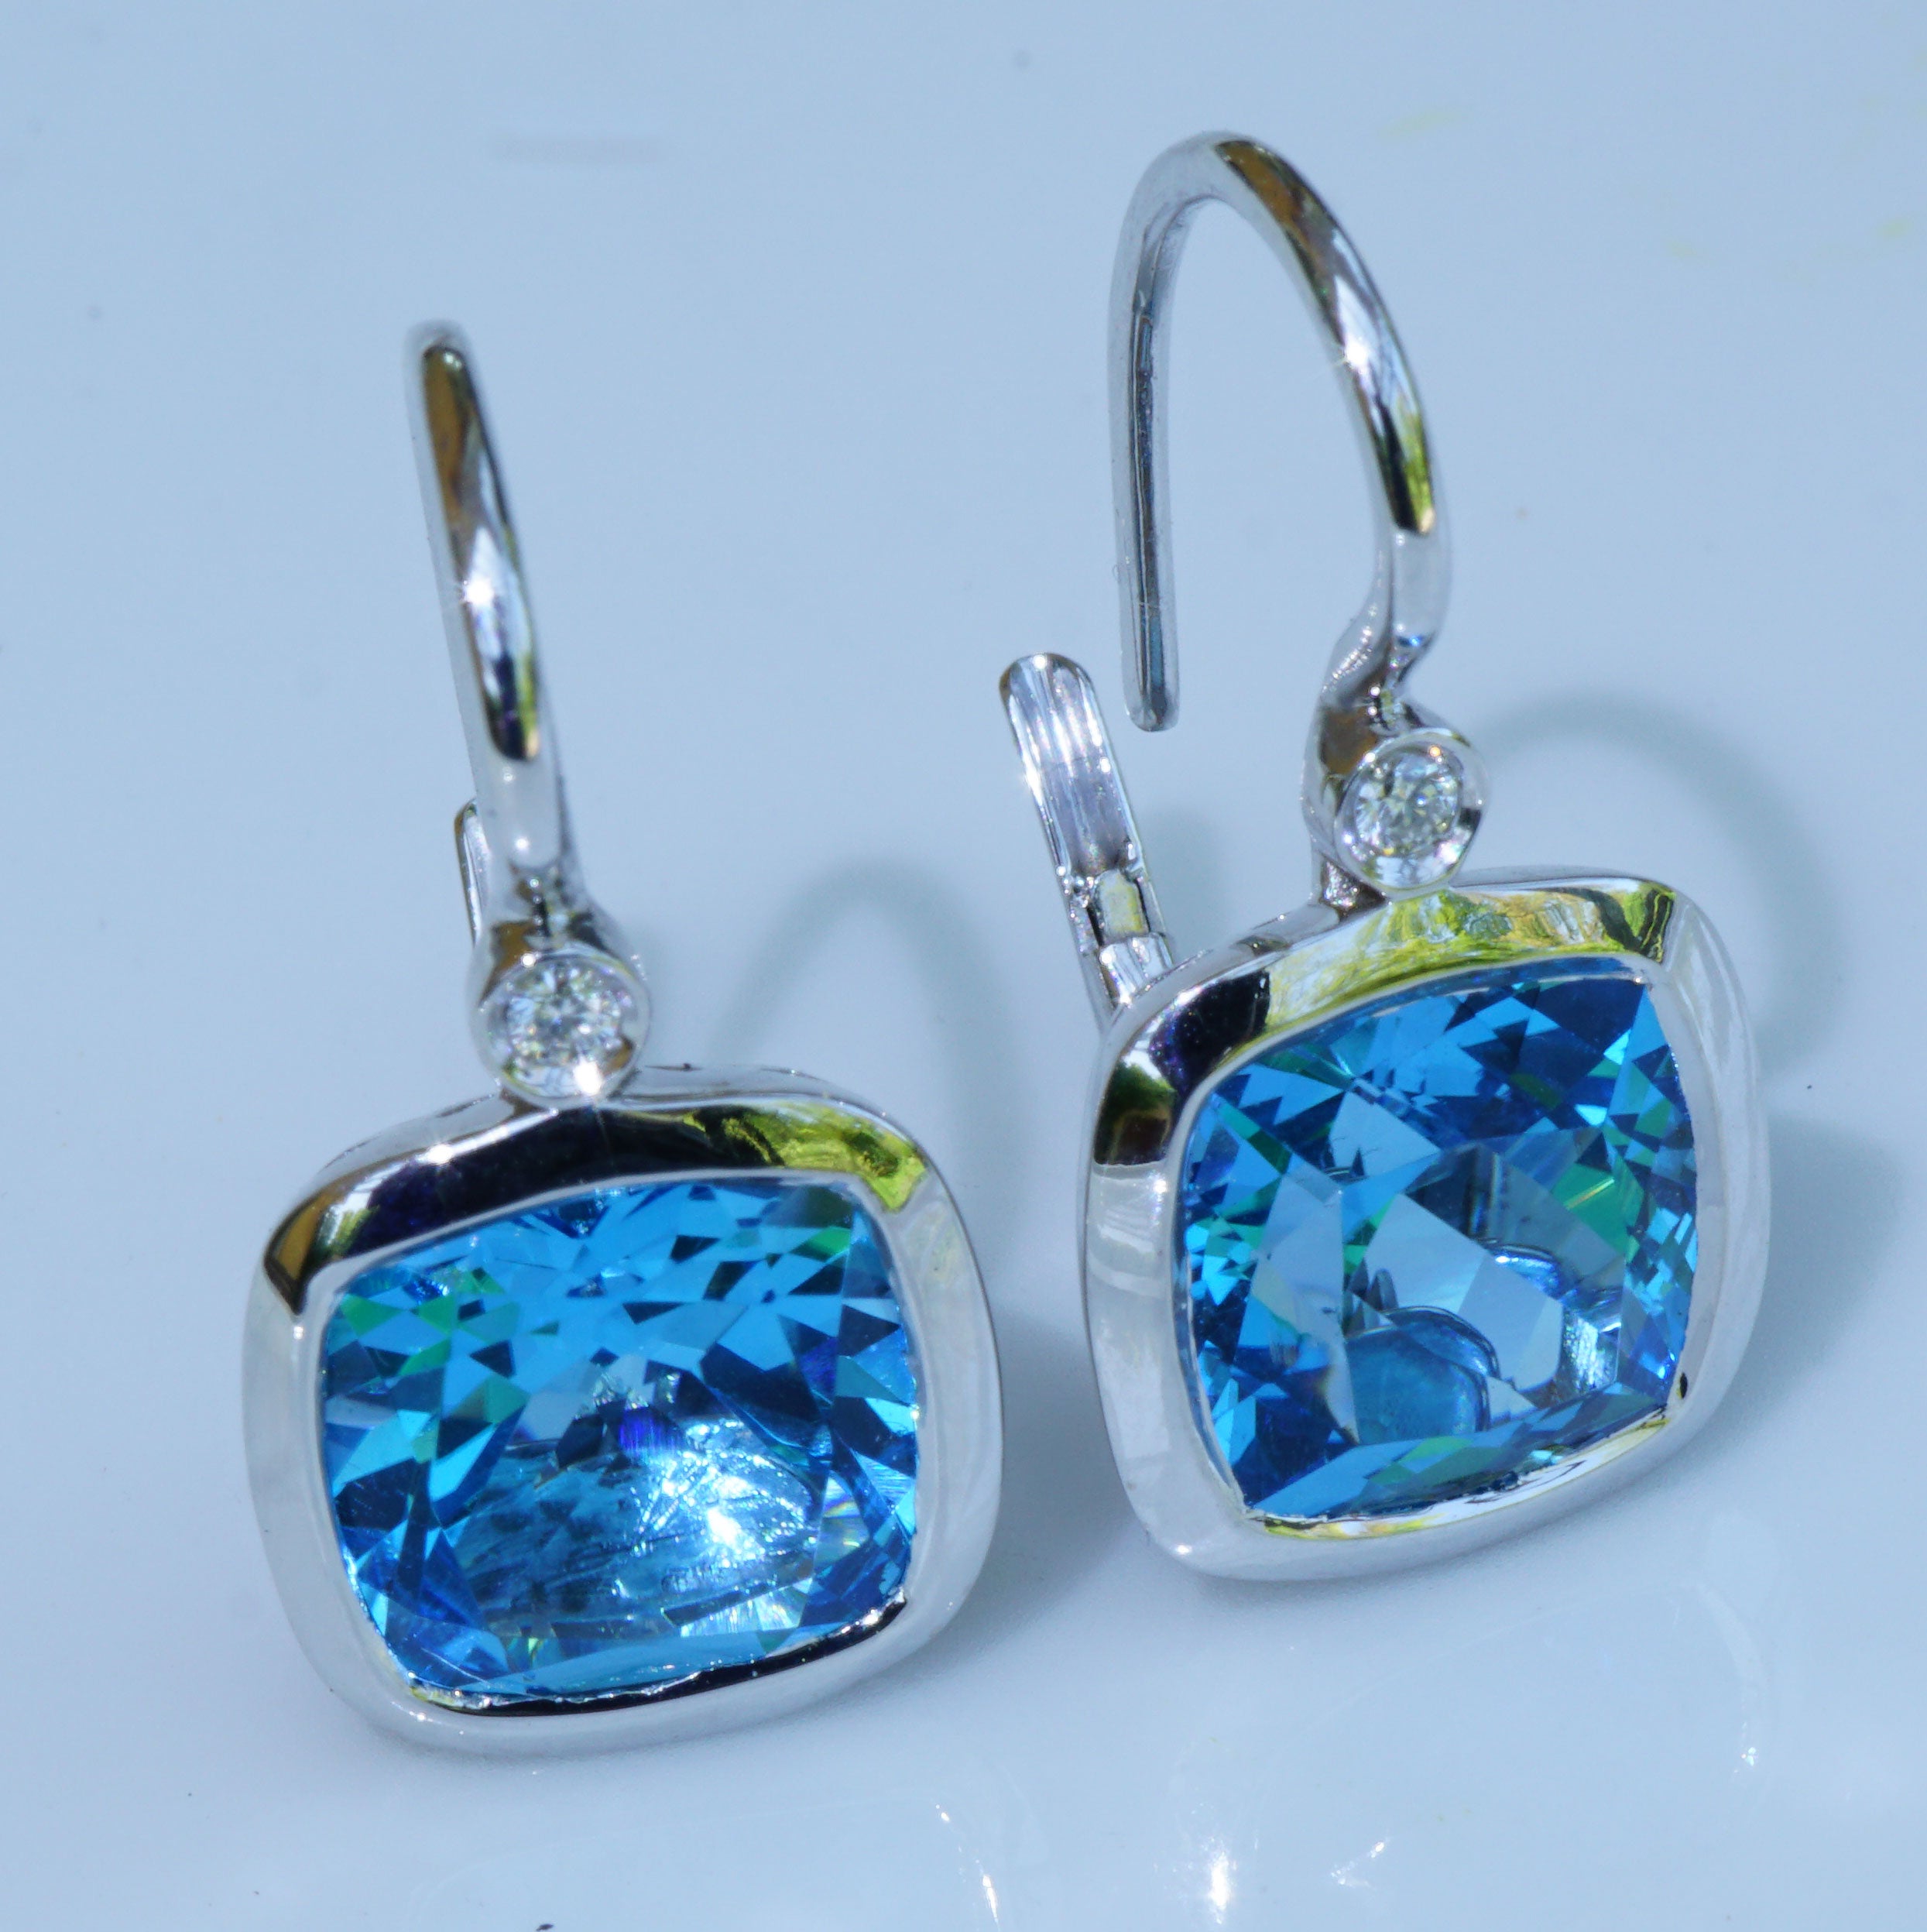  Earrings of high quality made in a traditional Italian goldsmith in Valenza, each a square cushion-shaped cut blue topaz total approx. 7.29 ct, translucent underlined in the noble diamond-shaped openwork pattern, two full-cut brilliant-cut diamonds